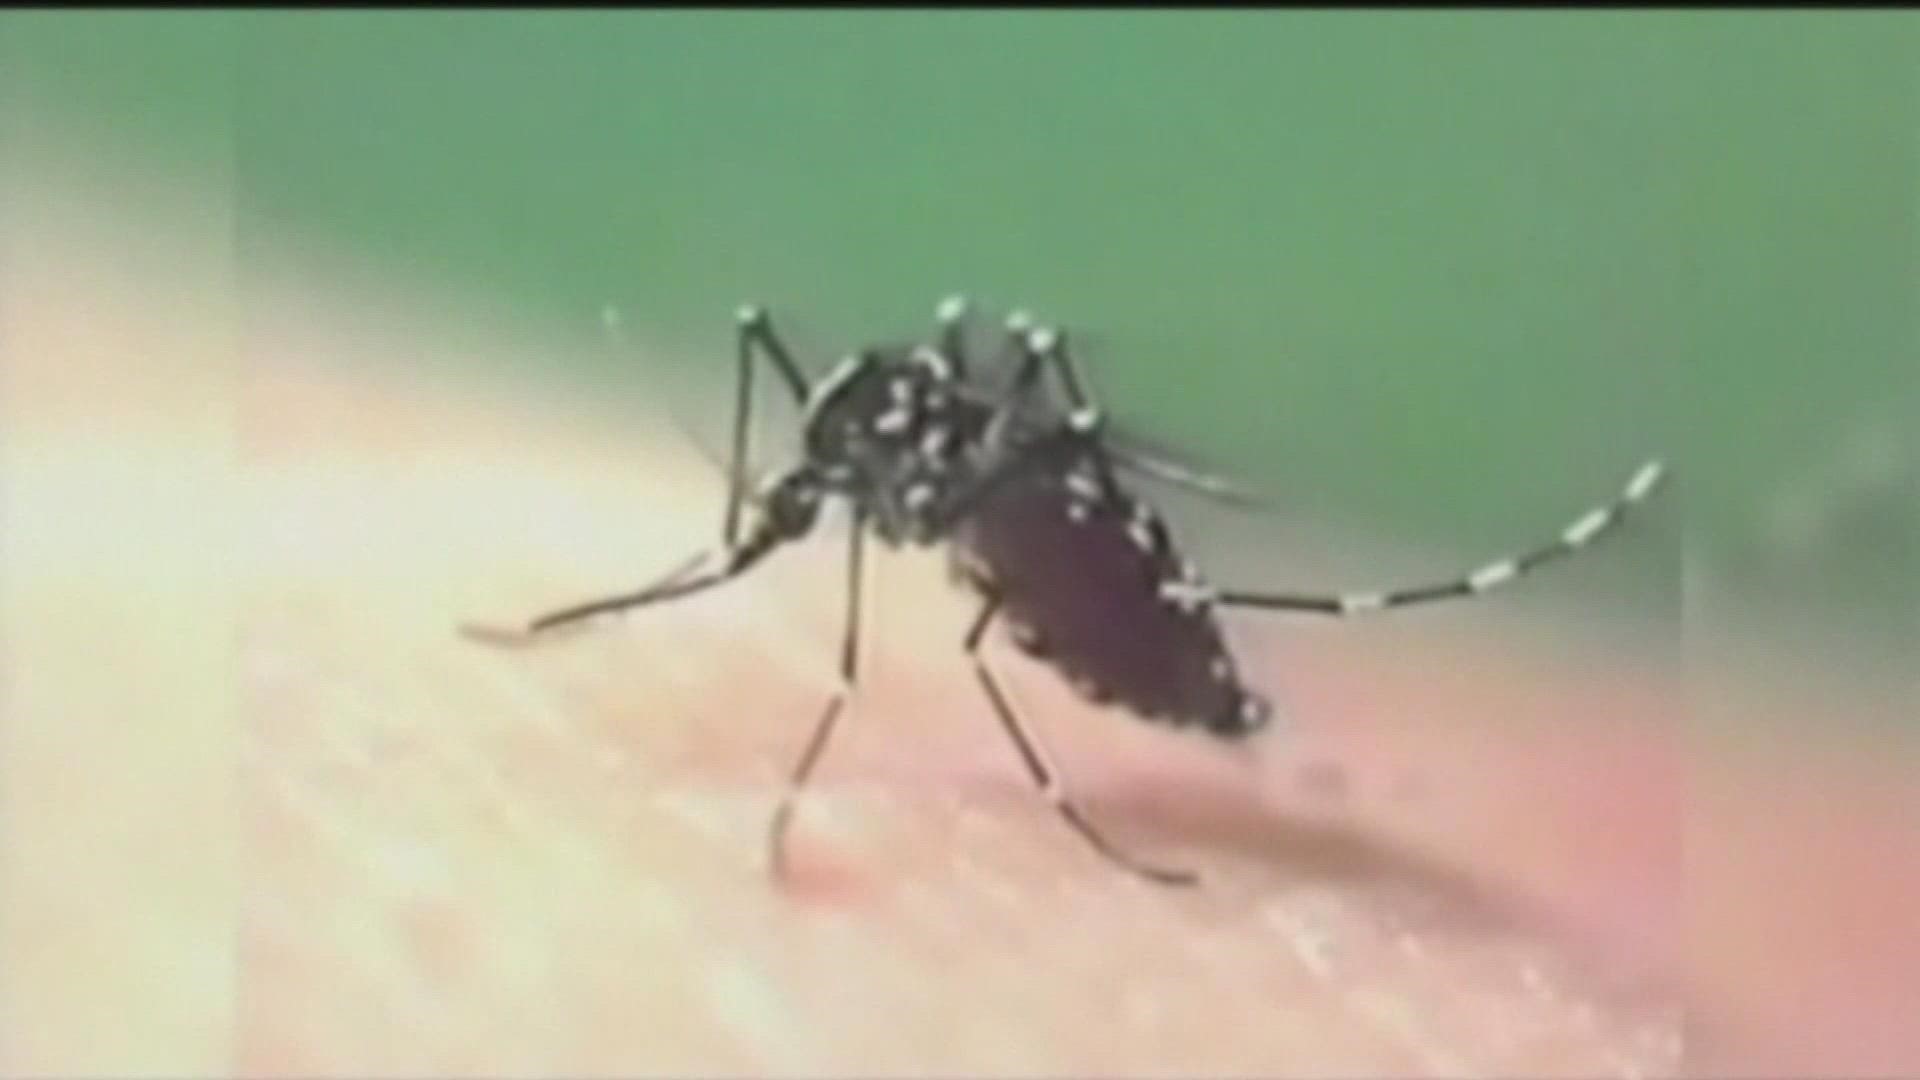 WNV is typically spread to humans and animals through bites from infected mosquitos, but does not spread from person to person.